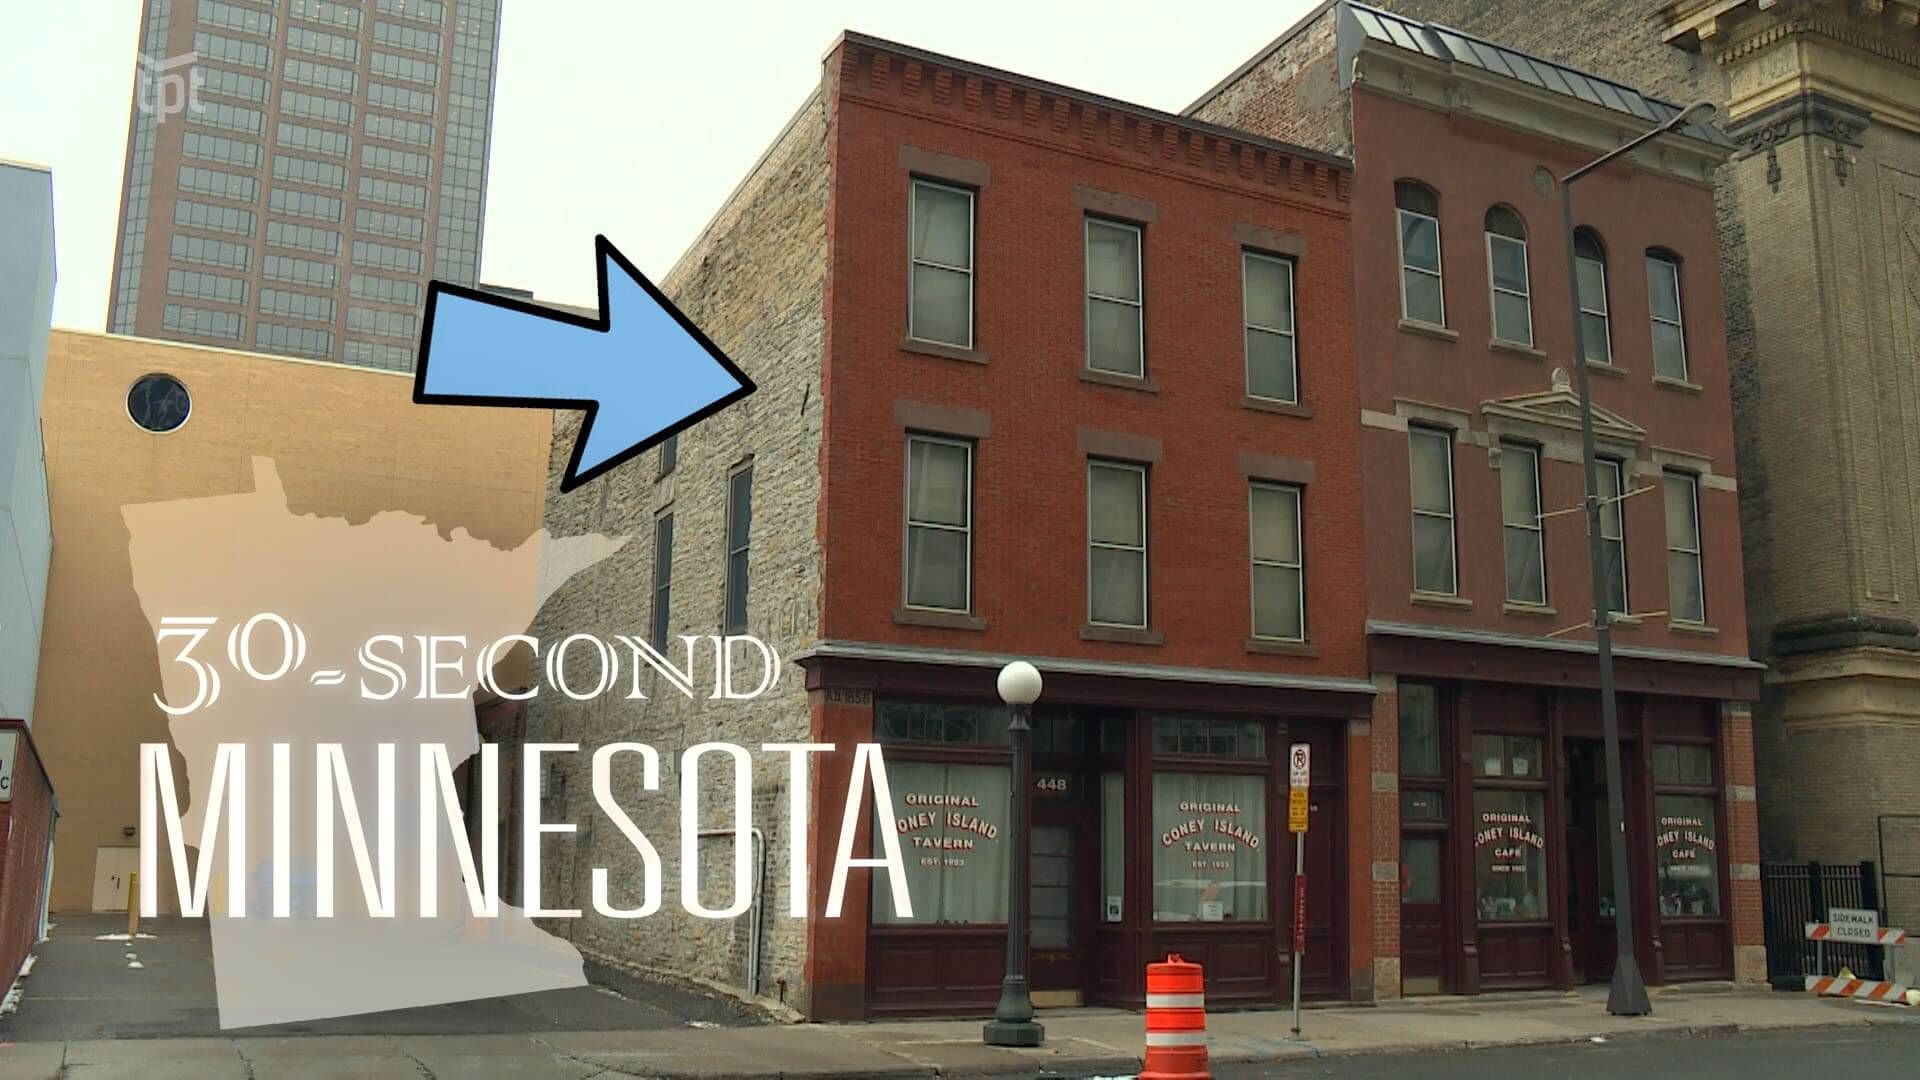 30-Second Minnesota: What's the oldest building in downtown St. Paul?